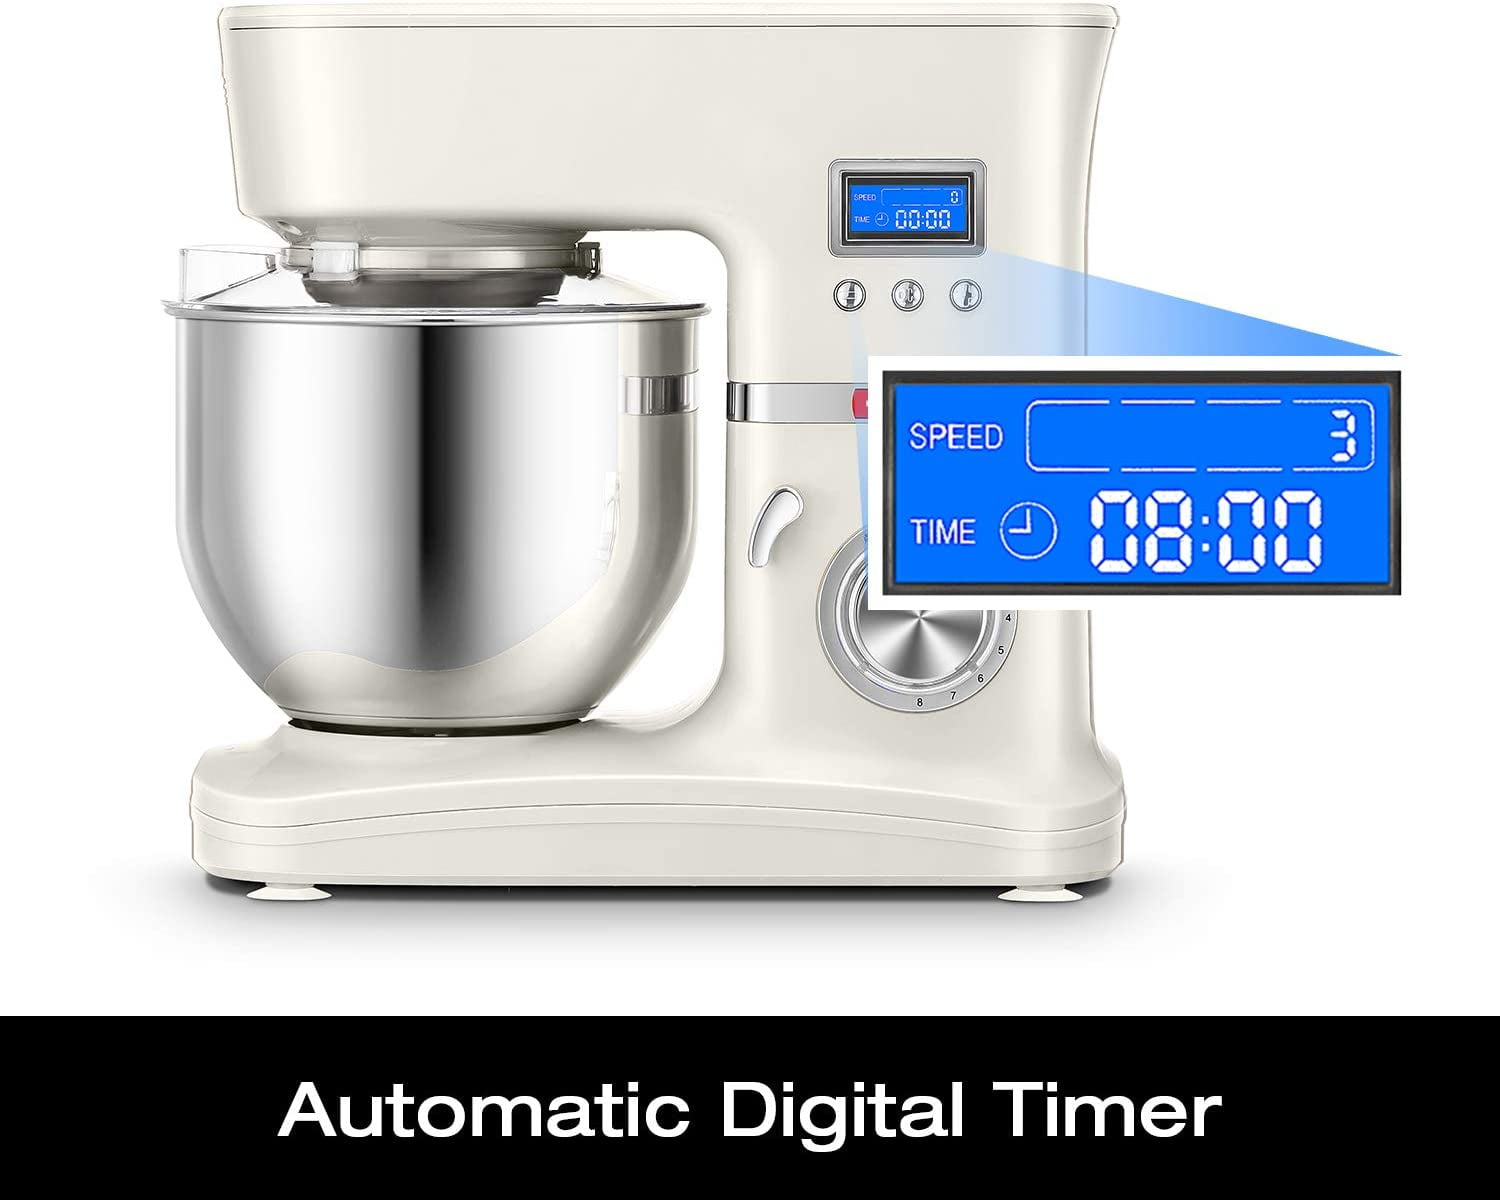 Planetary Mixing 8 Speeds & Pulse Includes Dough Hook Flat Beater Hauswirt Stand Mixer Slicer/Shredder Attachment Wire Whip 4.5-quart Tilt-Head Kitchen Mixer with Digital Timer Pouring Shield 